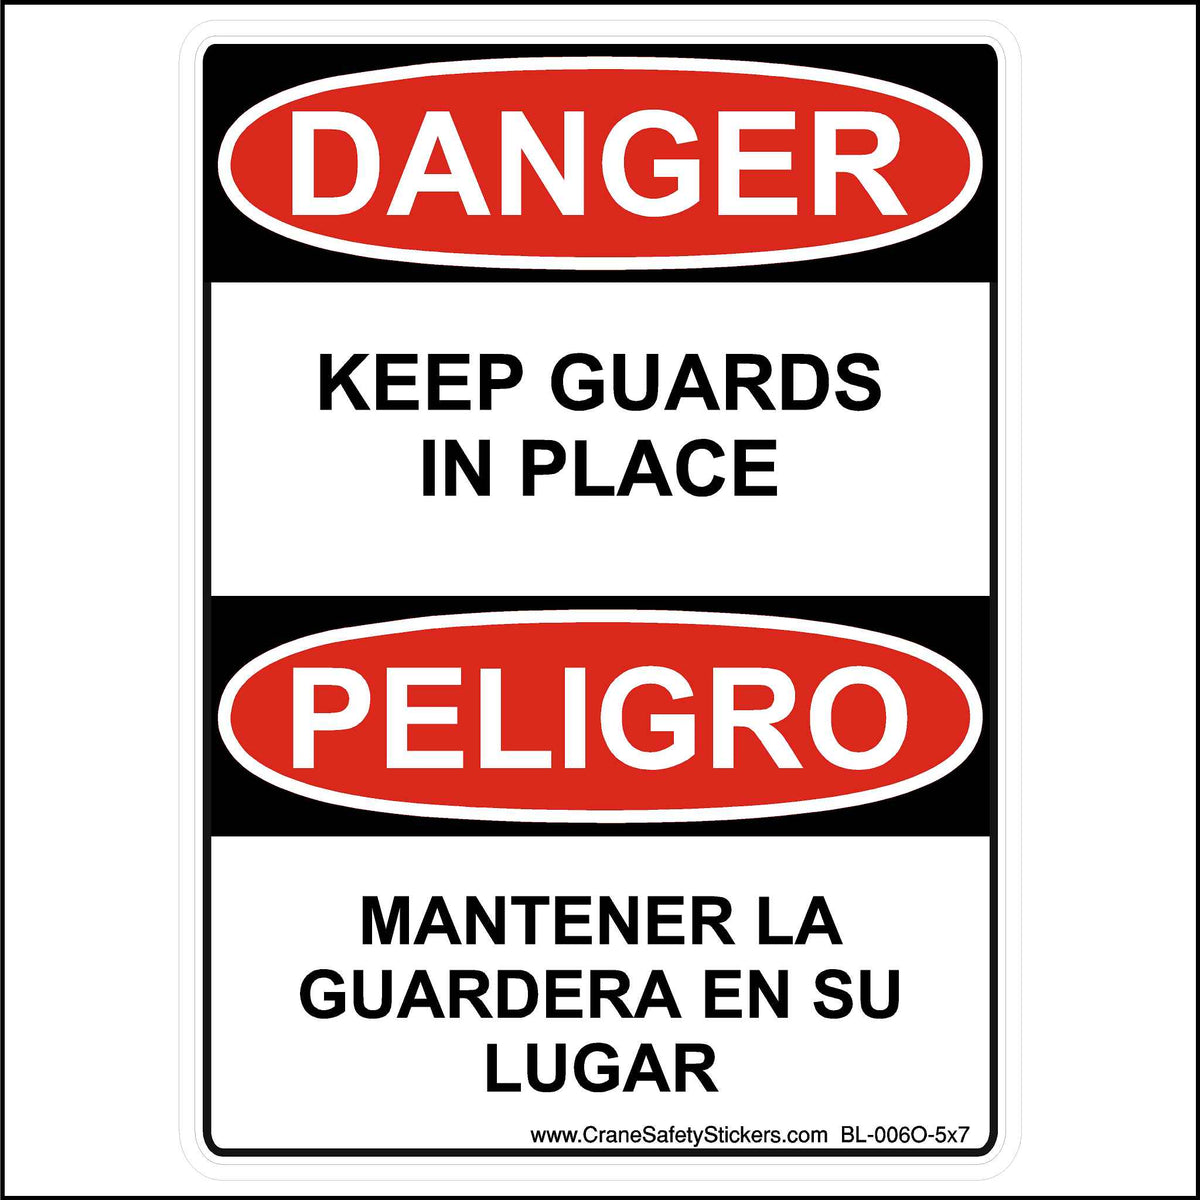 This 5x7 Inch Bilingual DANGER Keep Guards In Place English and Spanish Sticker is Printed With. DANGER Keep Guards In Place, PELIGRO MANTENER LA GUARDERA EN SU LUGAR.